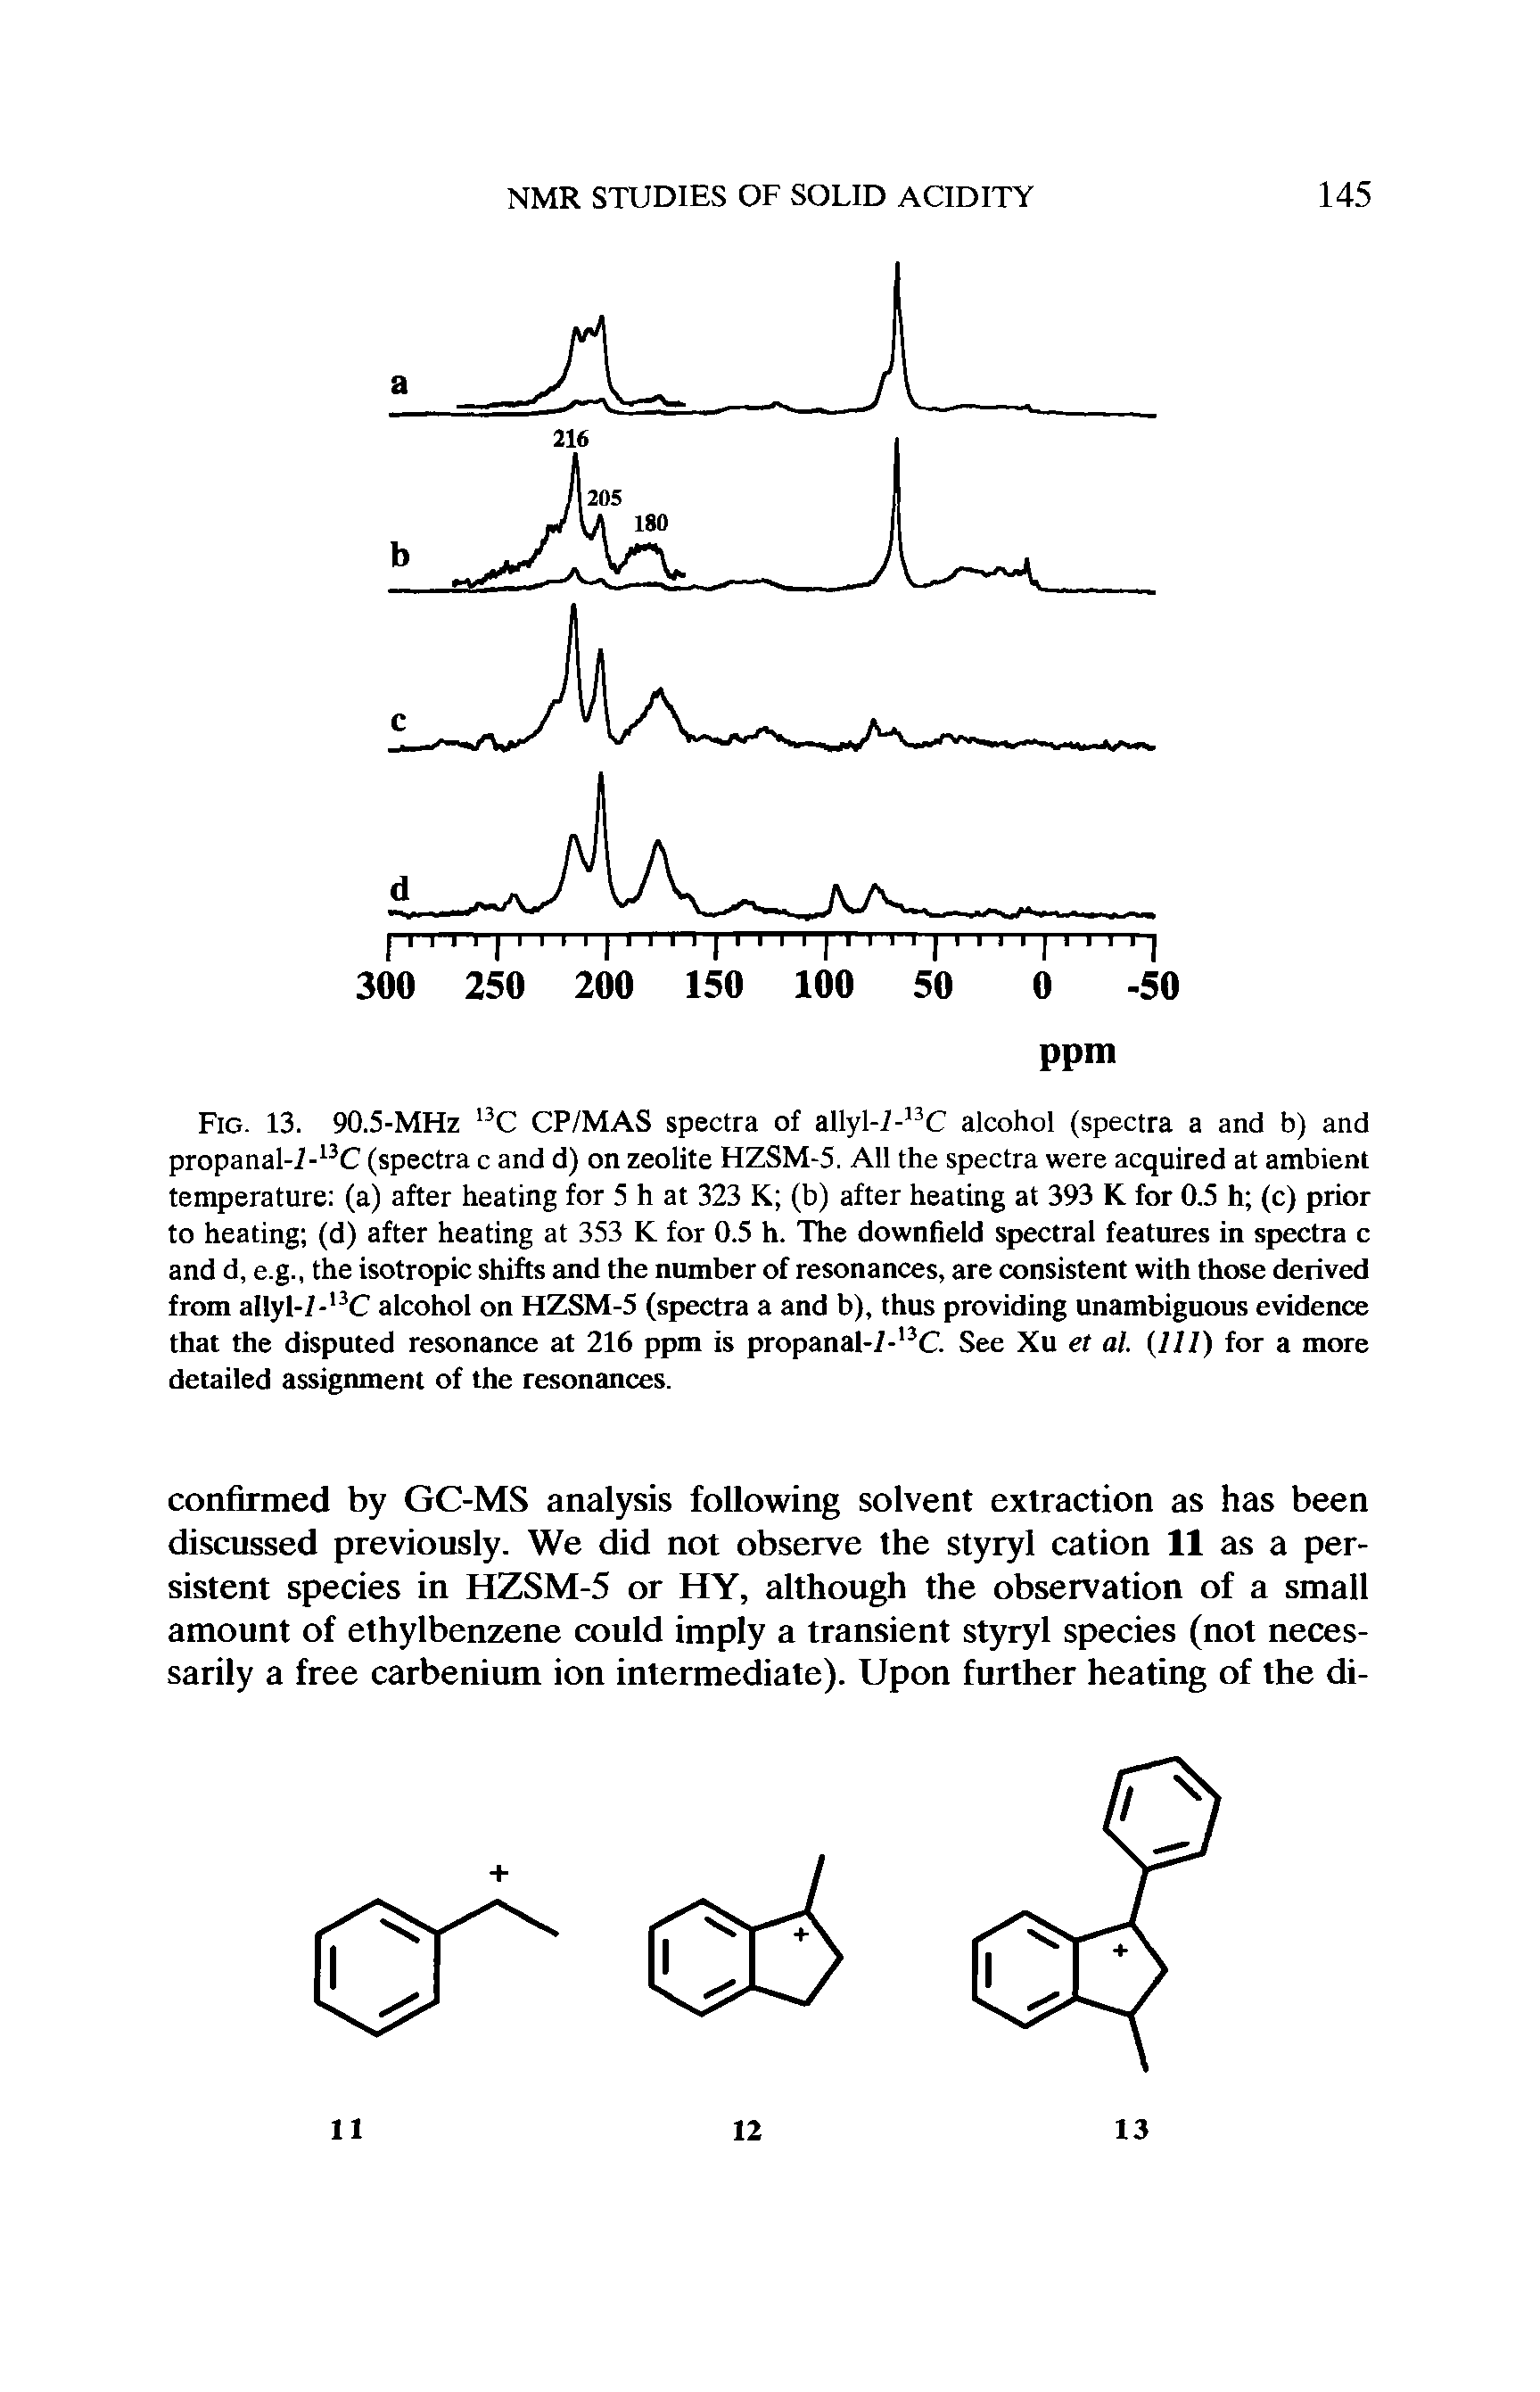 Fig. 13. 90.5-MHz 13C CP/MAS spectra of allyl-/-l3C alcohol (spectra a and b) and propanal-I-13C (spectra c and d) on zeolite FIZSM-5. All the spectra were acquired at ambient temperature (a) after heating for 5 h at 323 K (b) after heating at 393 K for 0.5 h (c) prior to heating (d) after heating at 353 K for 0.5 h. The downfield spectral features in spectra c and d, e.g., the isotropic shifts and the number of resonances, are consistent with those derived from allyl-/-l3C alcohol on HZSM-5 (spectra a and b), thus providing unambiguous evidence that the disputed resonance at 216 ppm is propanal-7-l3C. See Xu et at. (Ill) for a more detailed assignment of the resonances.